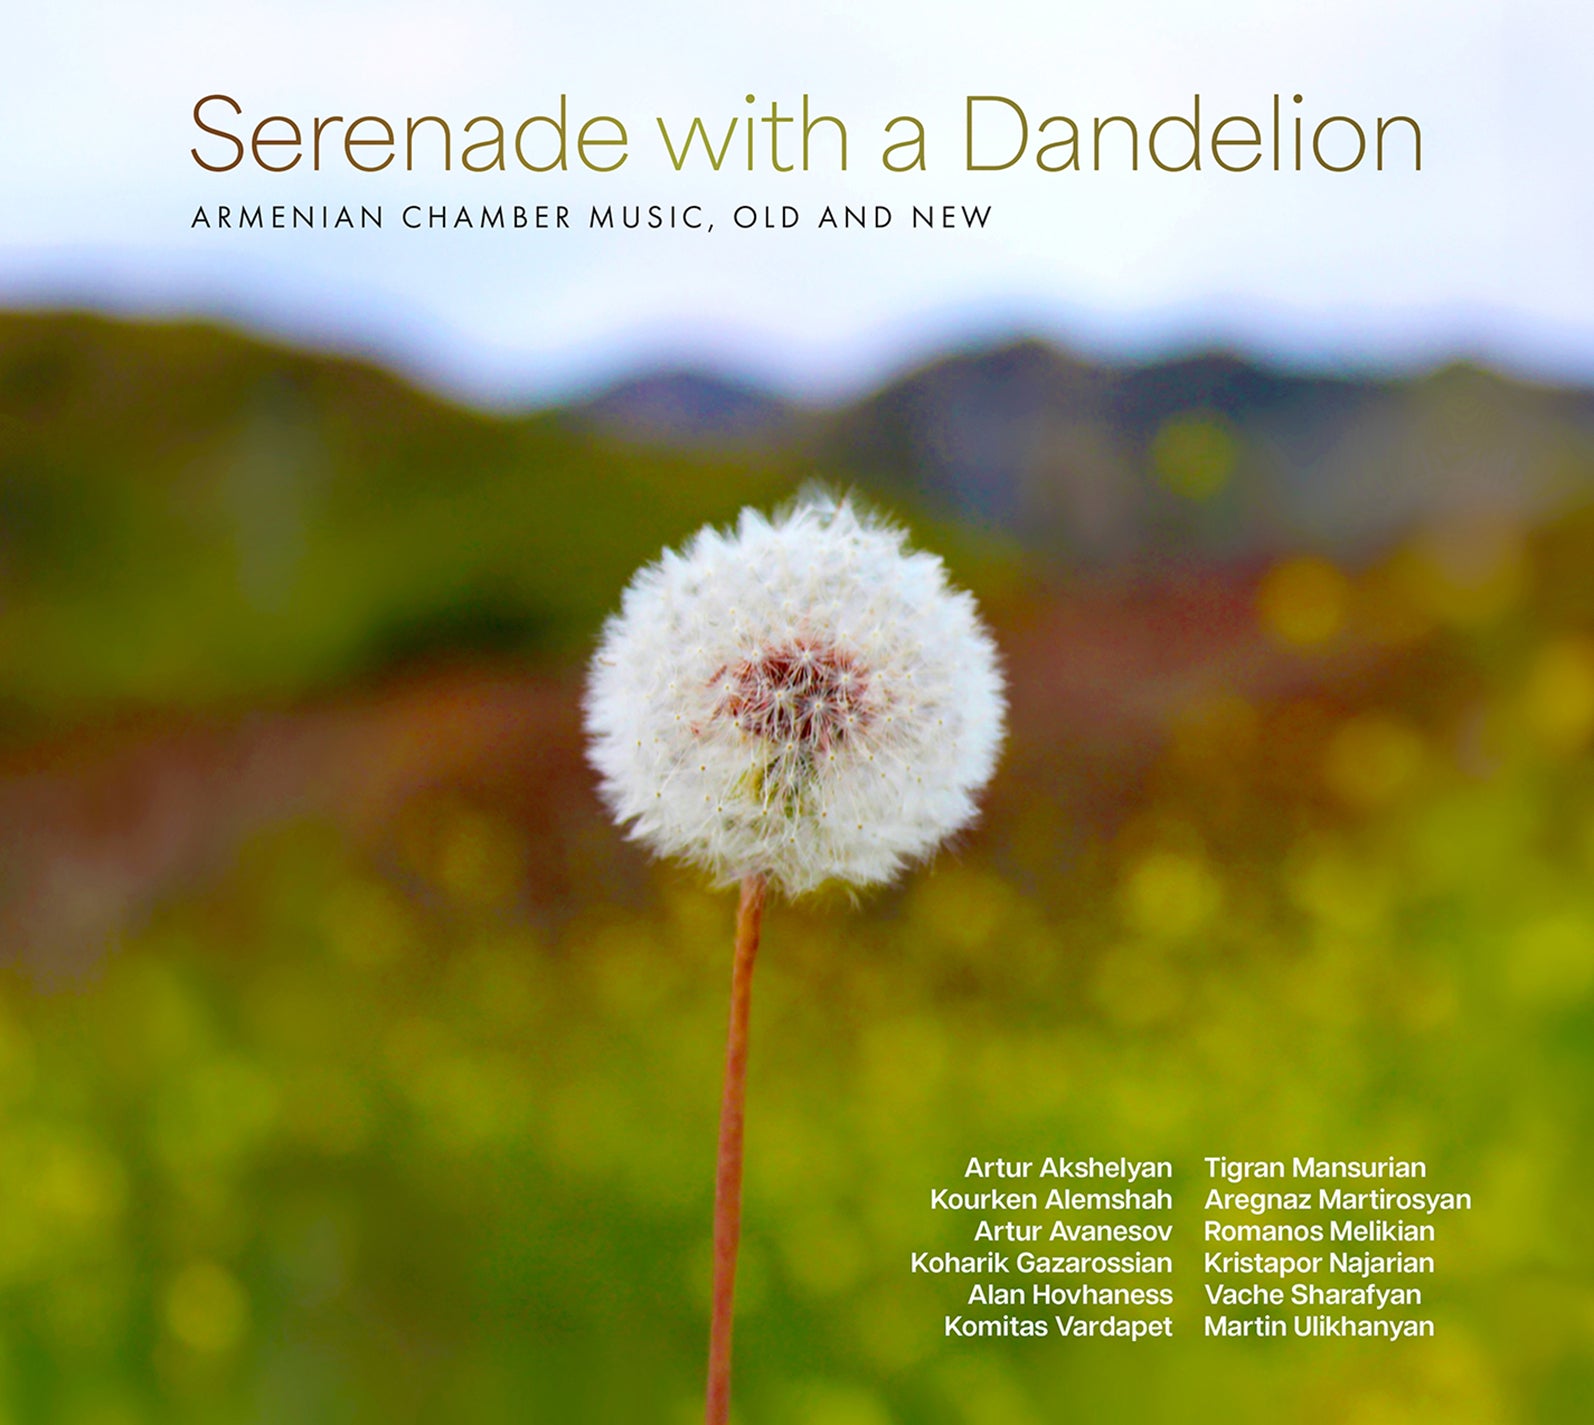 Serenade with a Dandelion: Armenian Chamber Music, Old & New